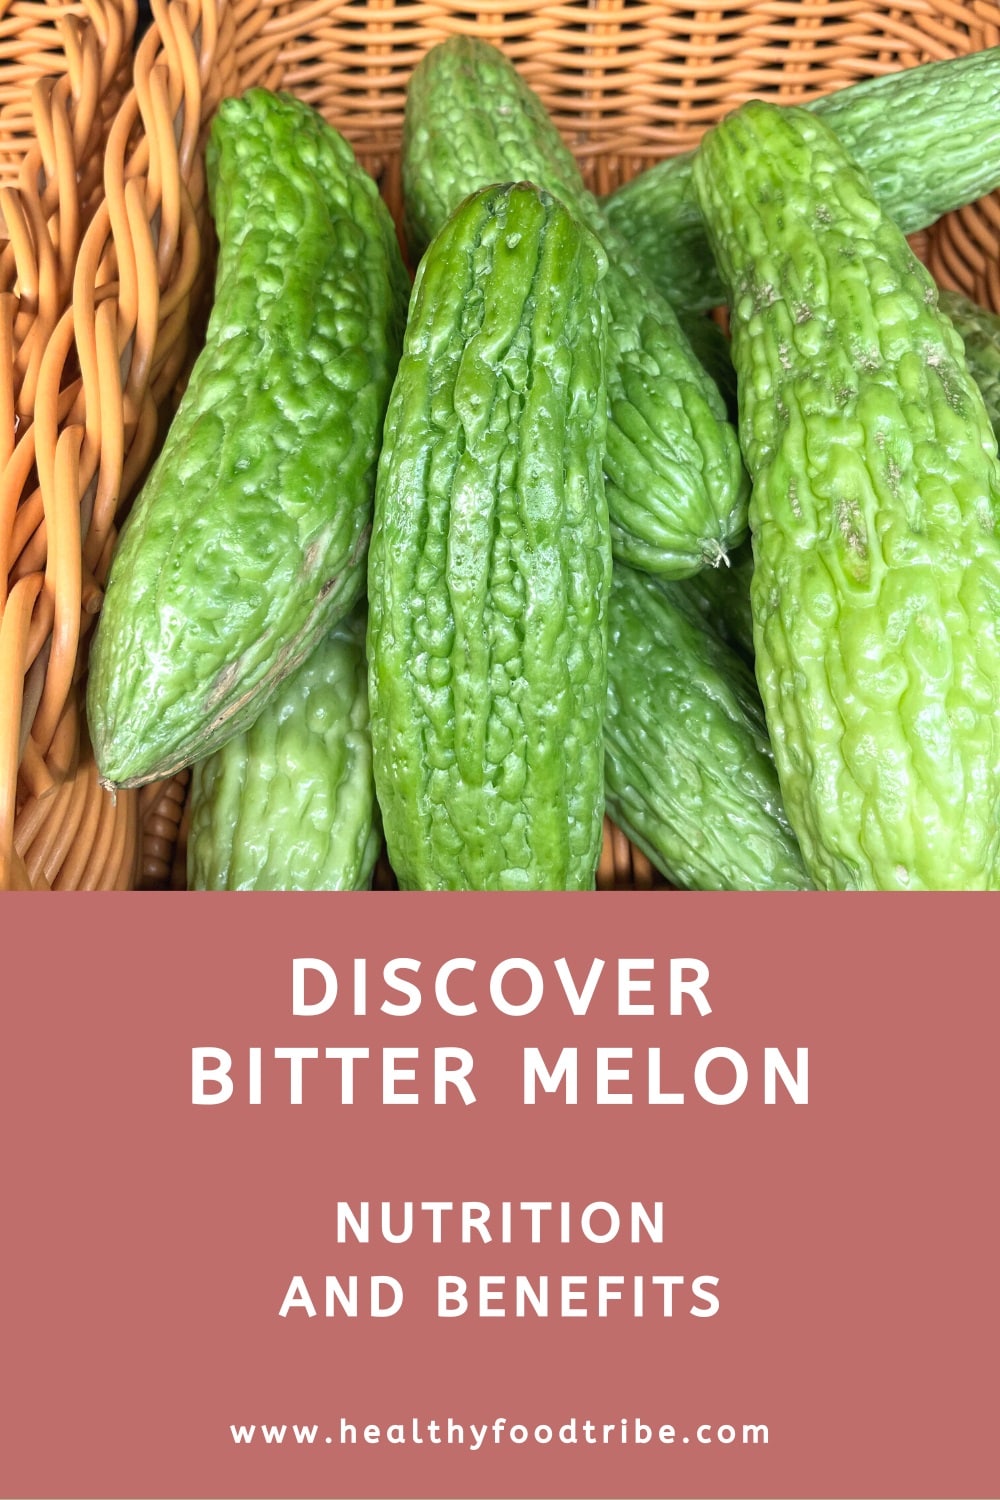 Discover bitter melon (origin, nutrition and benefits)